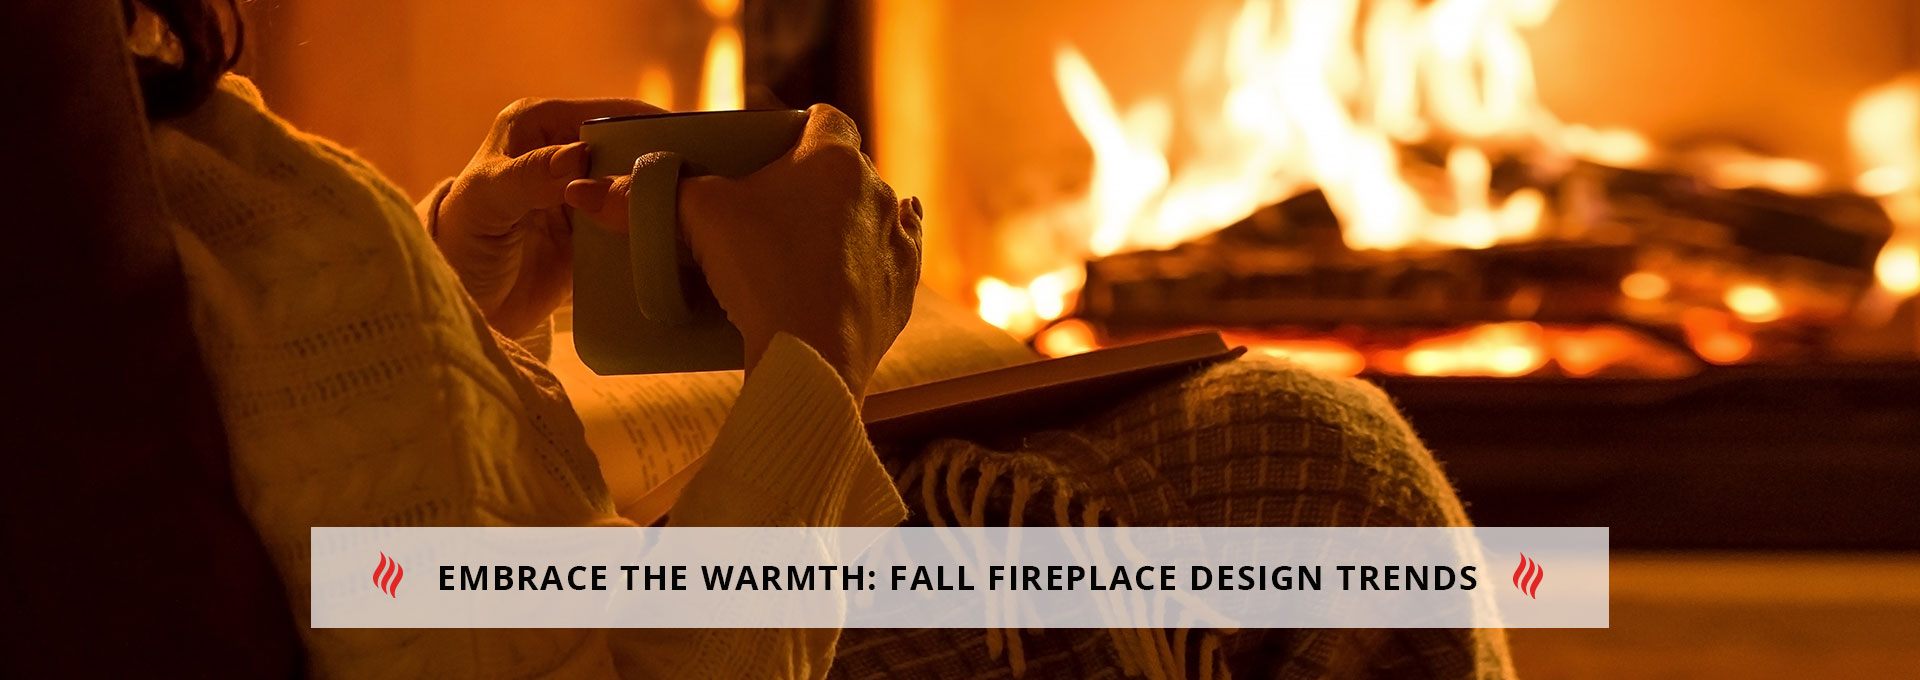 Embrace the Warmth: Fall Fireplace Design Ideas 